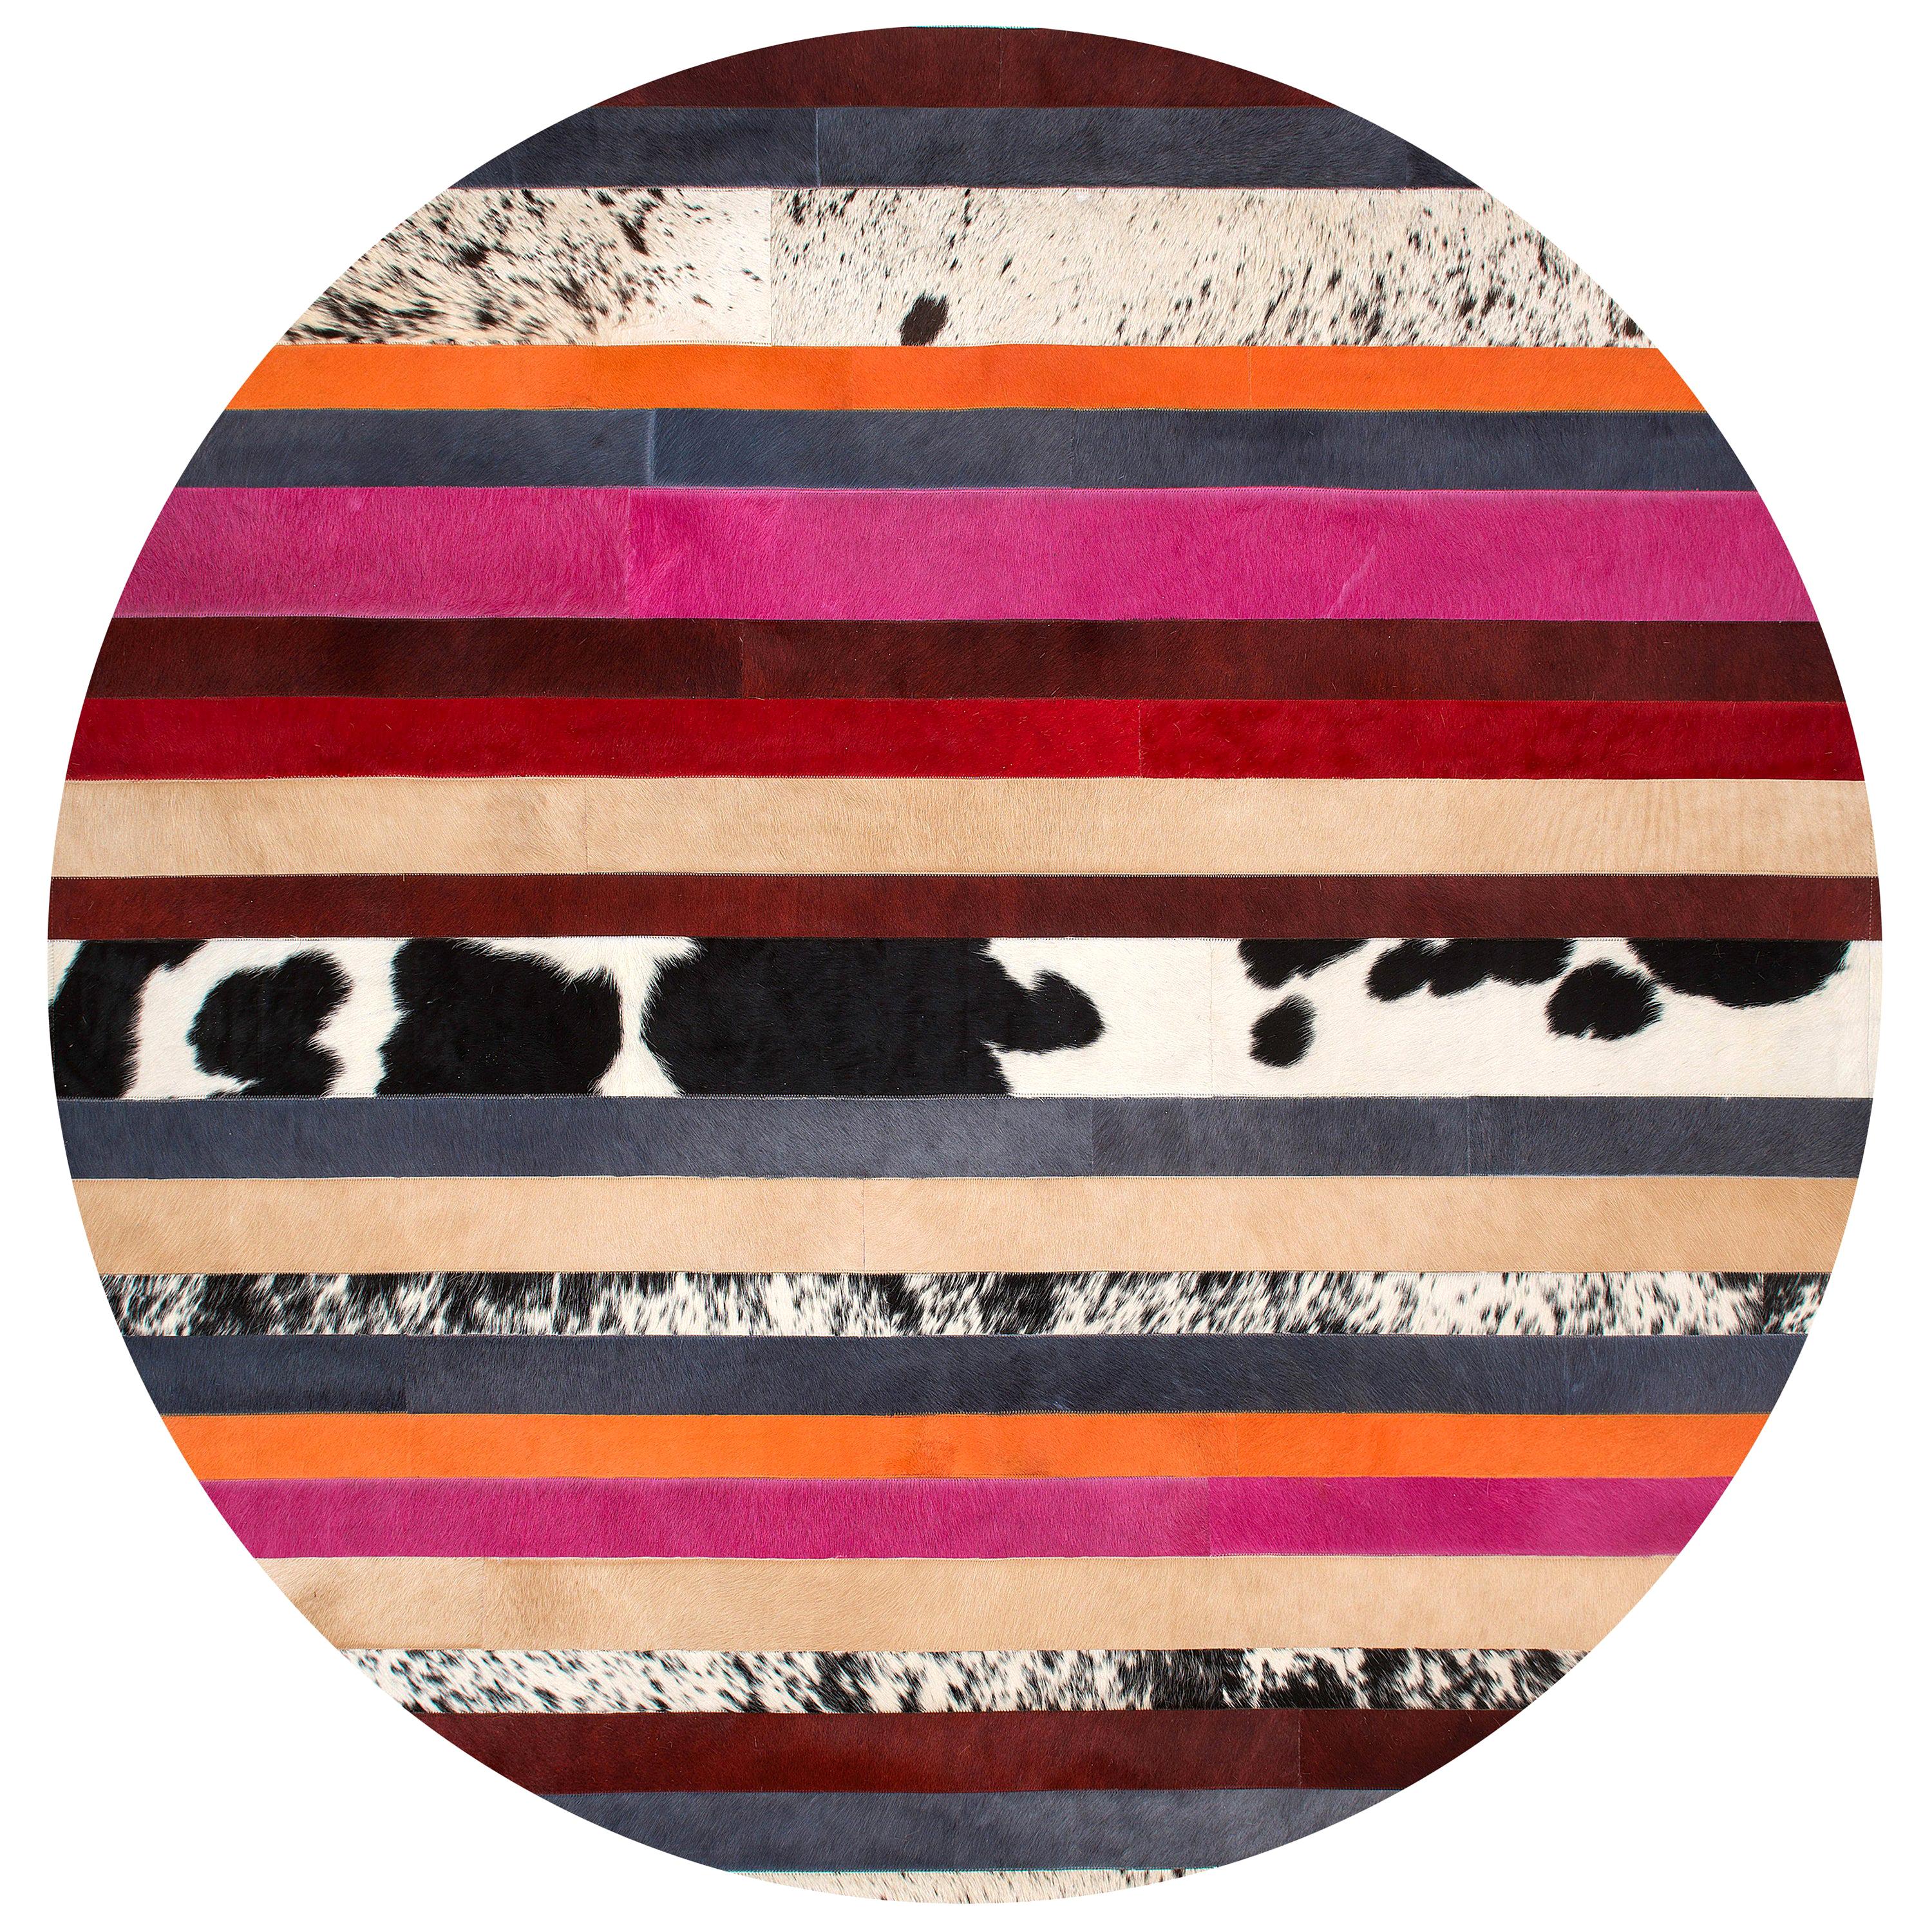 Pink & black striped Round Customizable Nueva Raya Cowhide Area Floor Rug Small For Sale